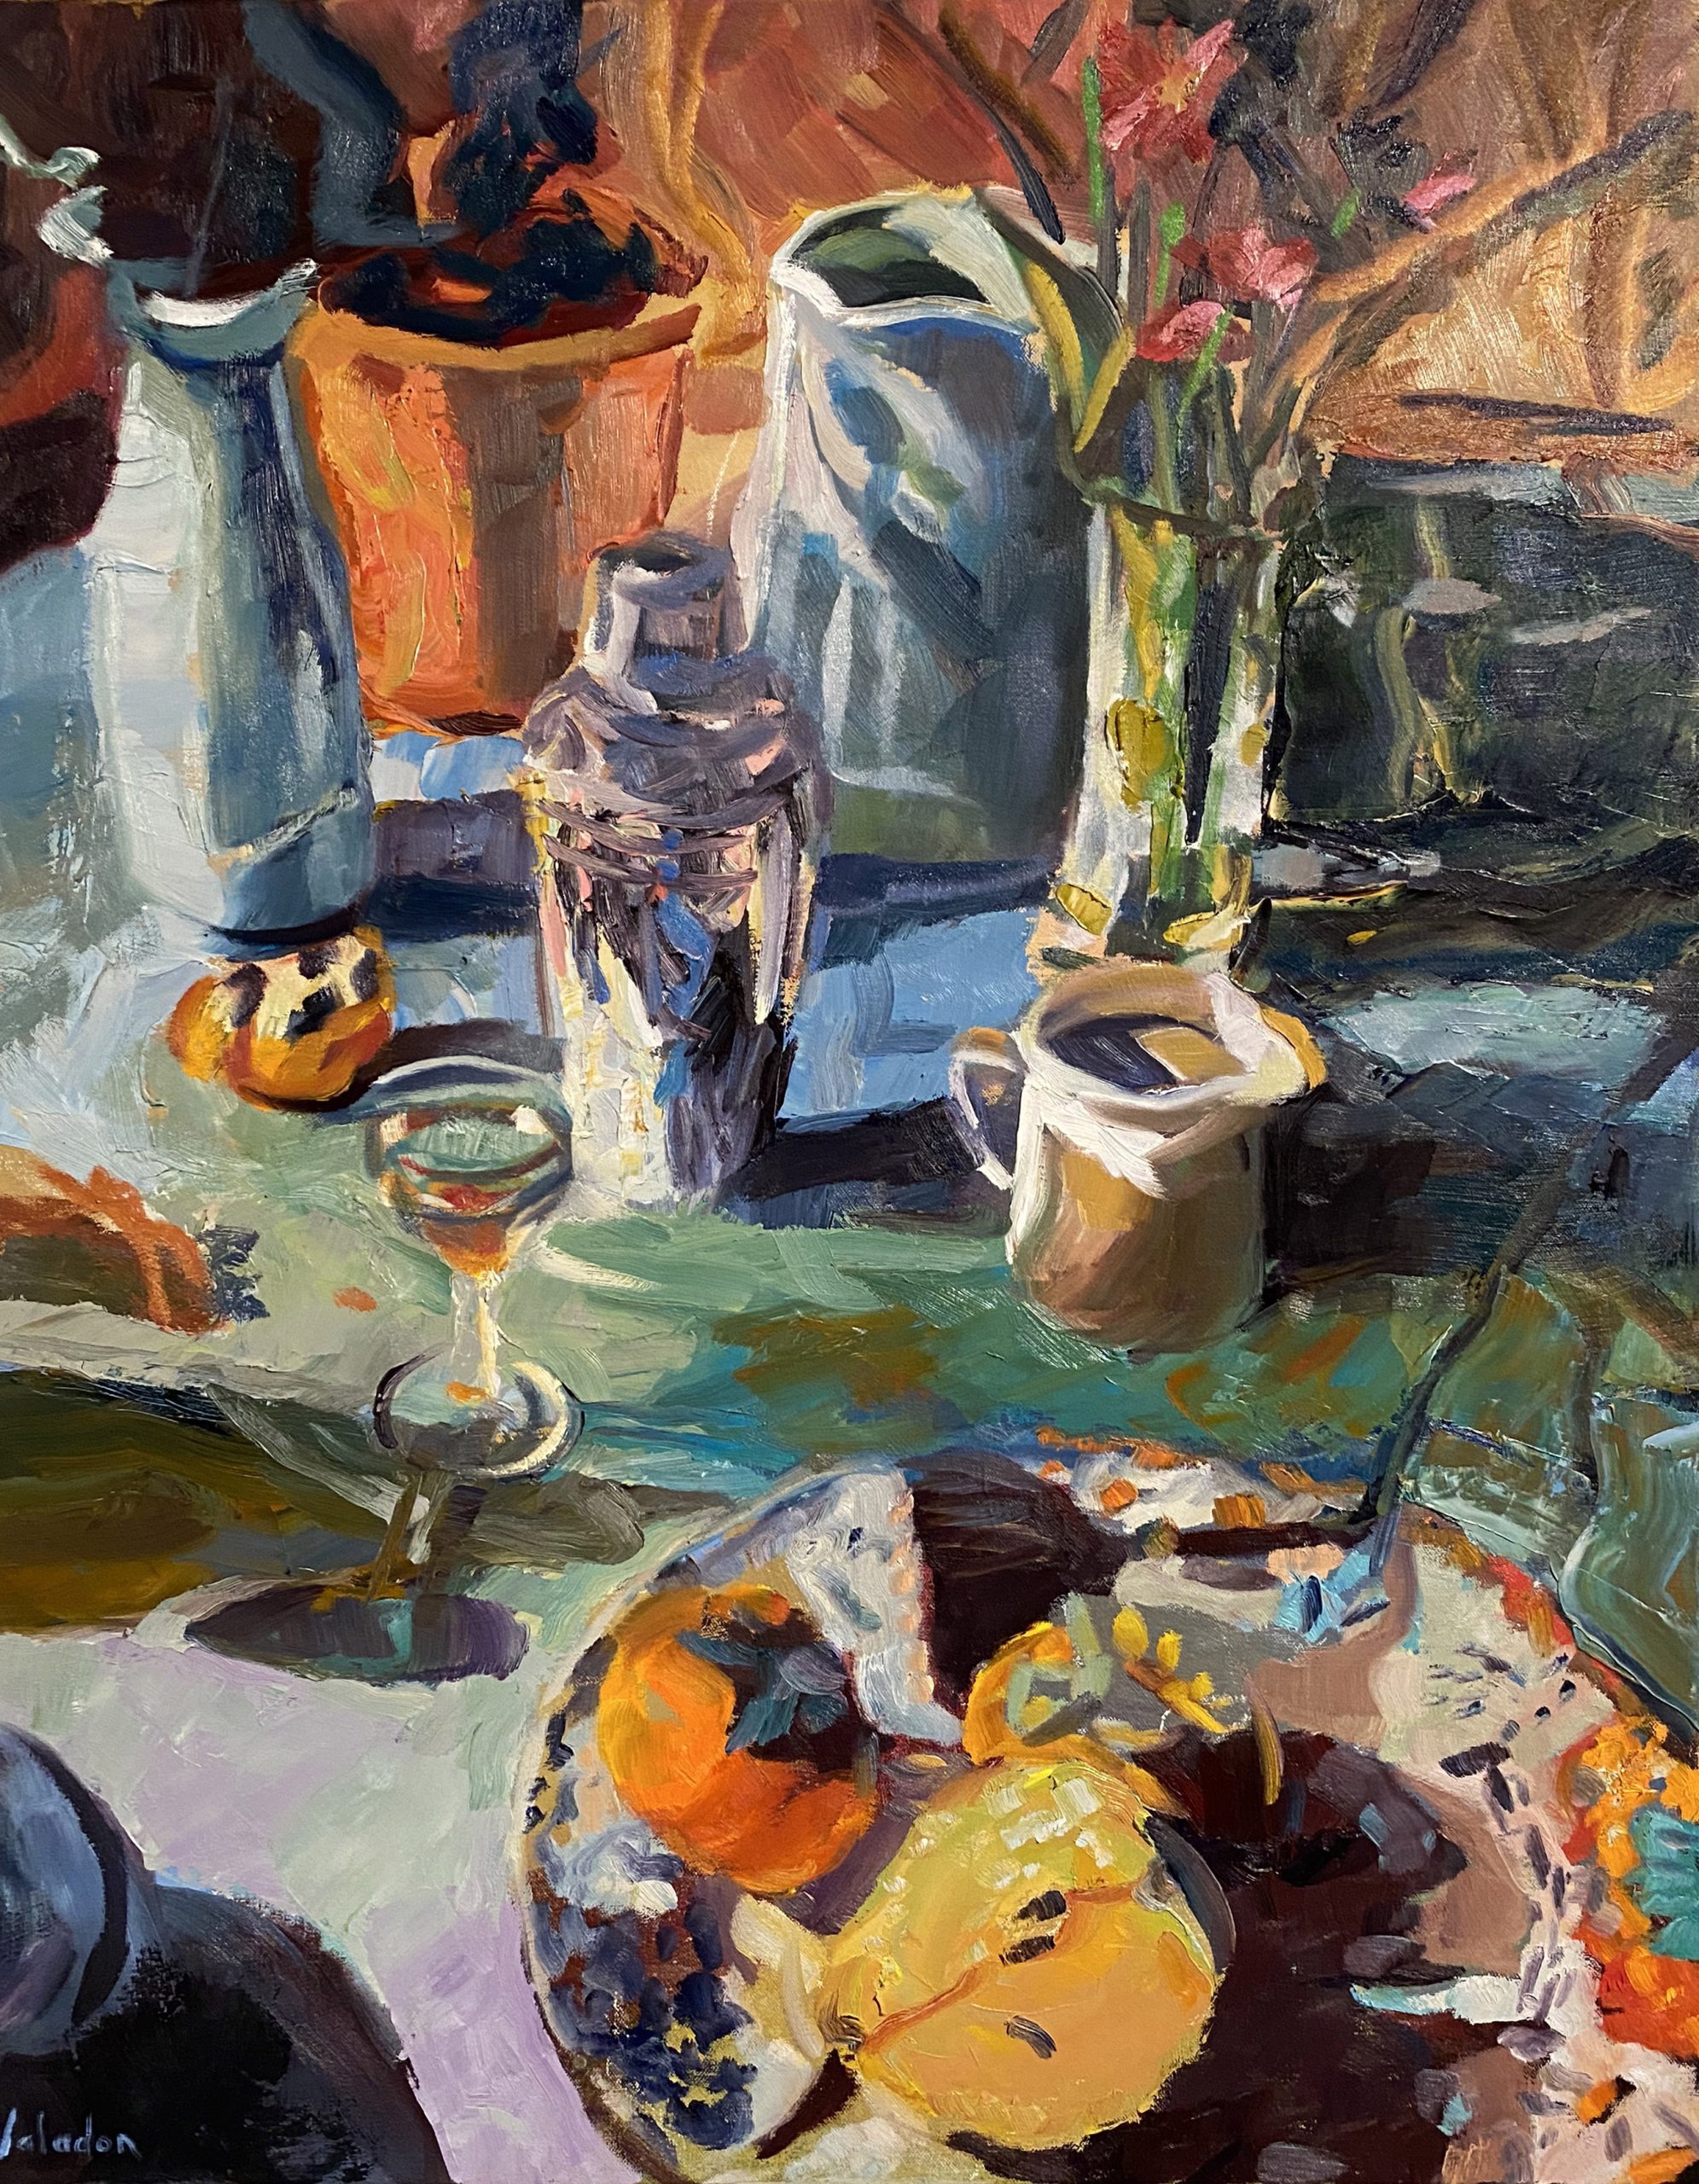 Rosemary Valadon 'In the Flow' oil on canvas 76 x 61cm $9,600